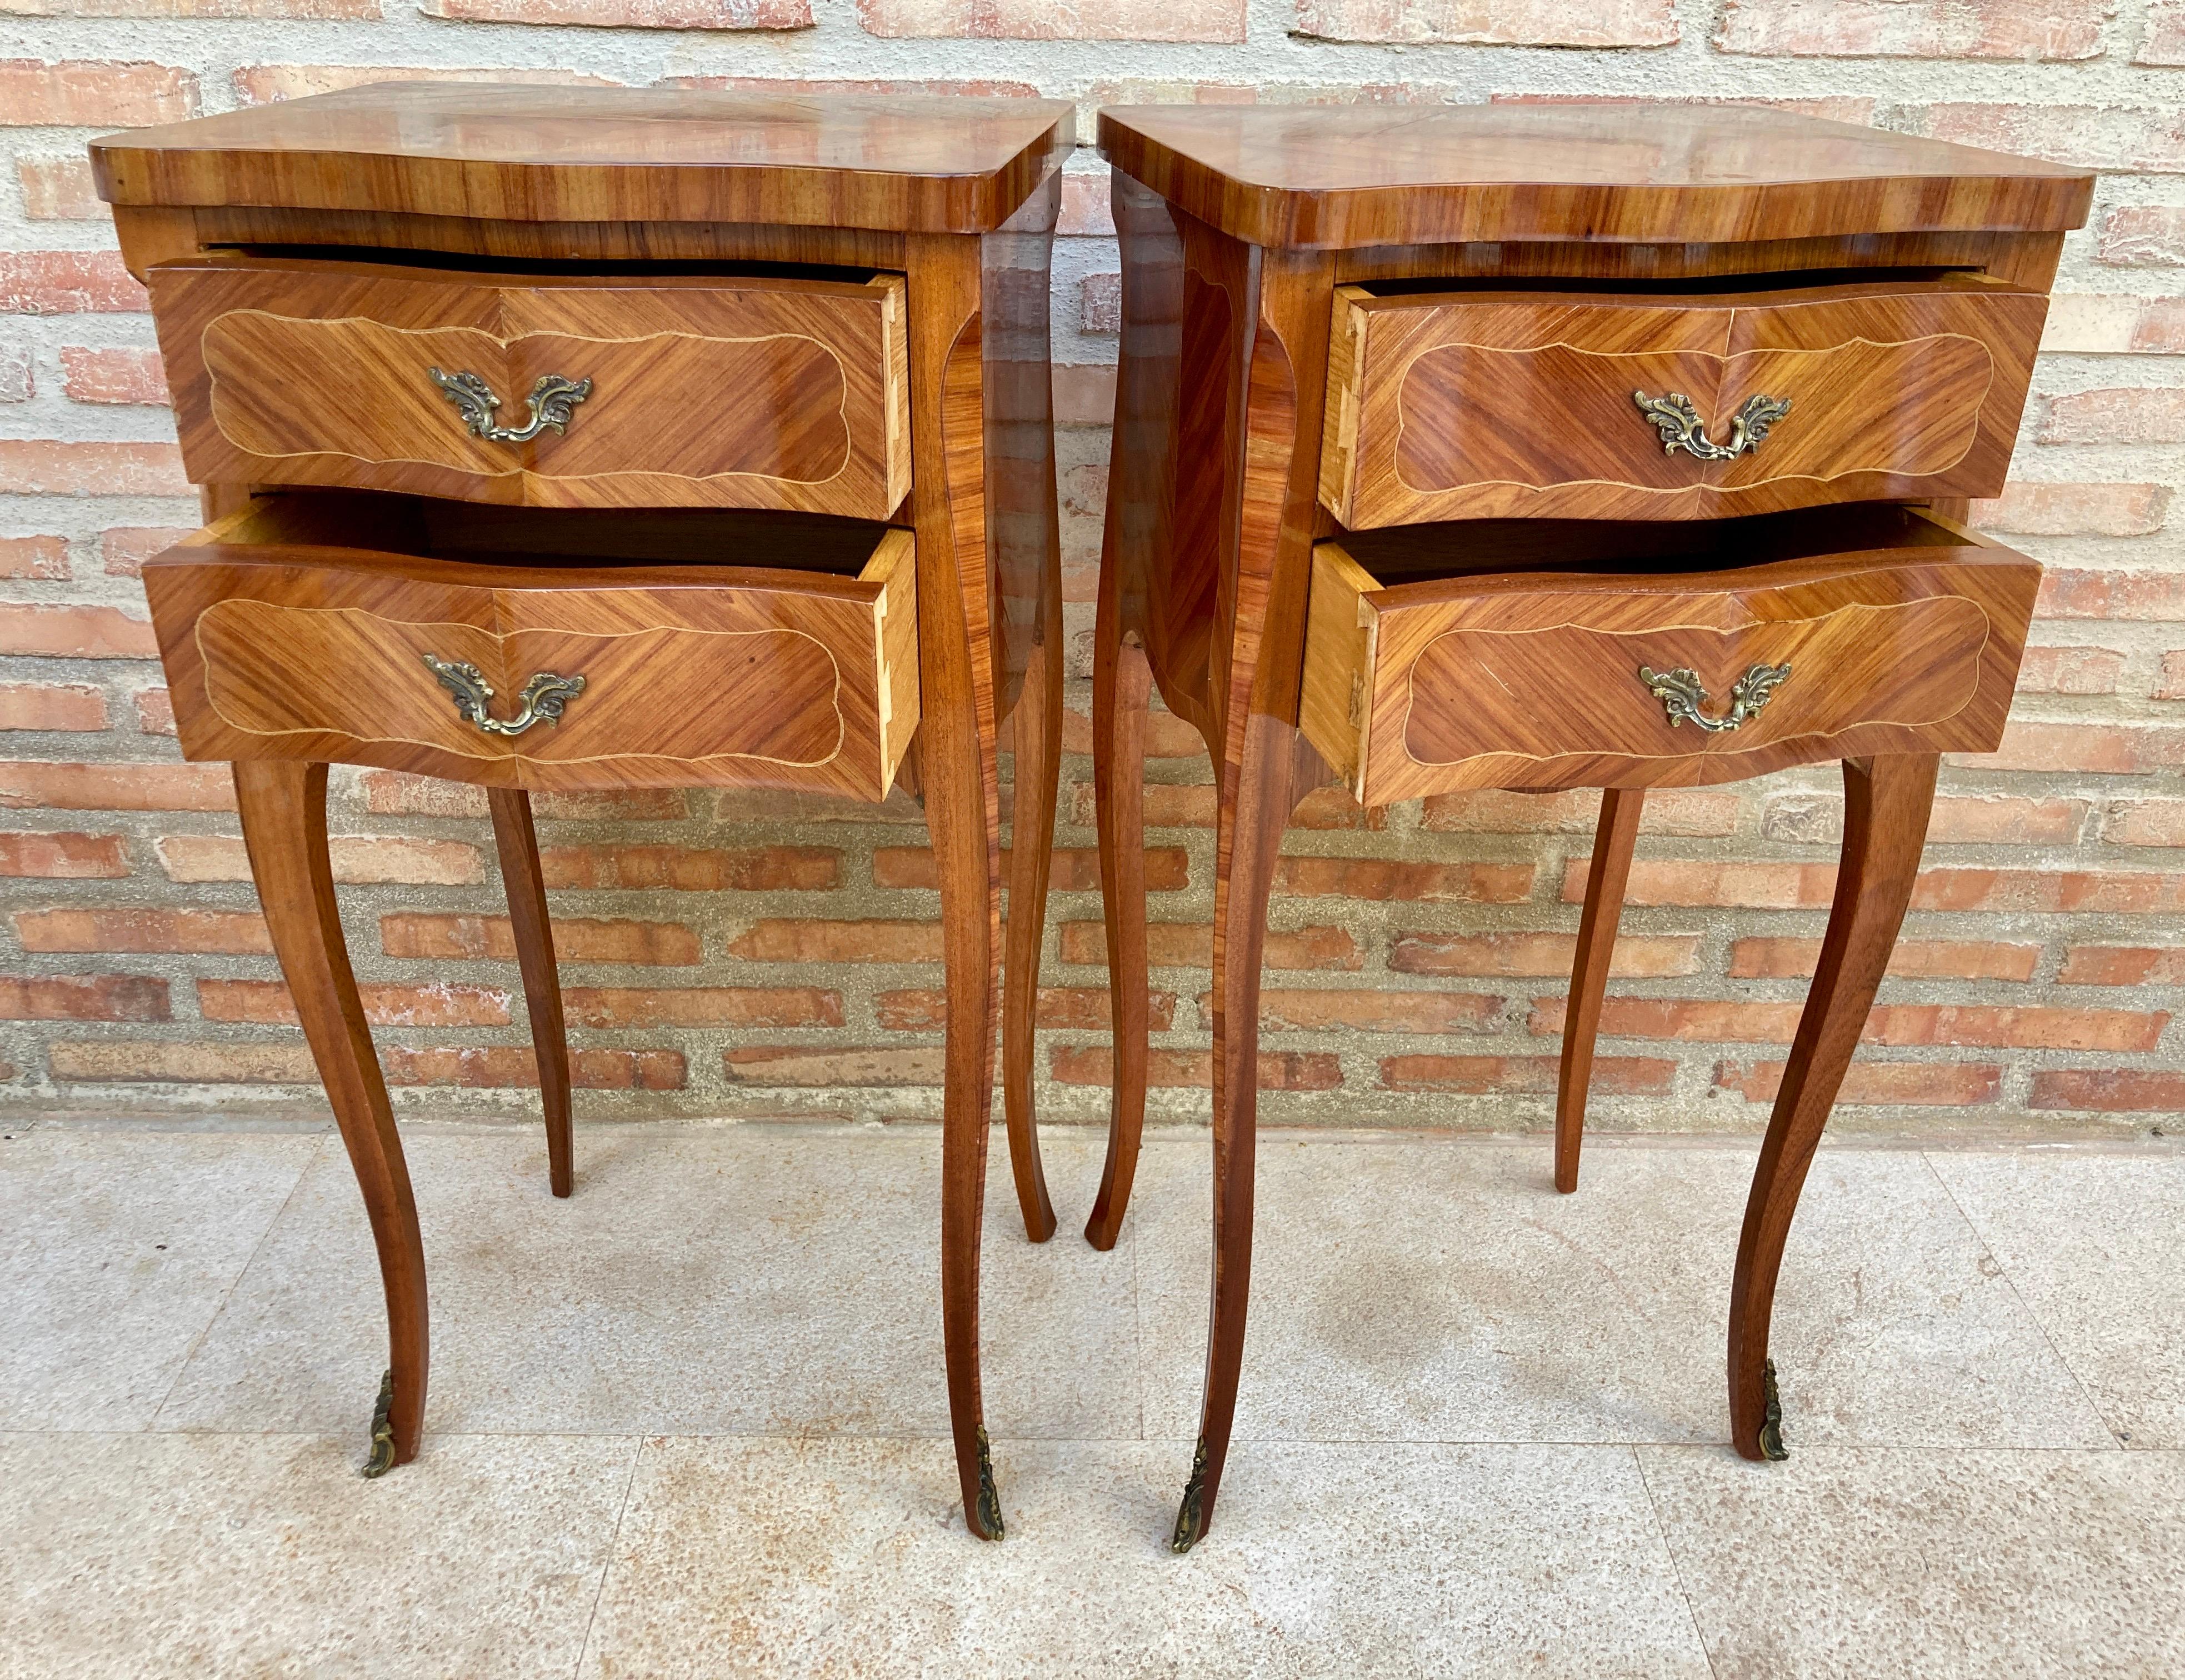 Elegant pair of coffee tables or bedside tables in antique Luigi XV style from the 1920s, rare and fine in walnut. This pair of bedside tables has particularly slim legs. In the front they have two comfortable drawers. Pair of really wonderful